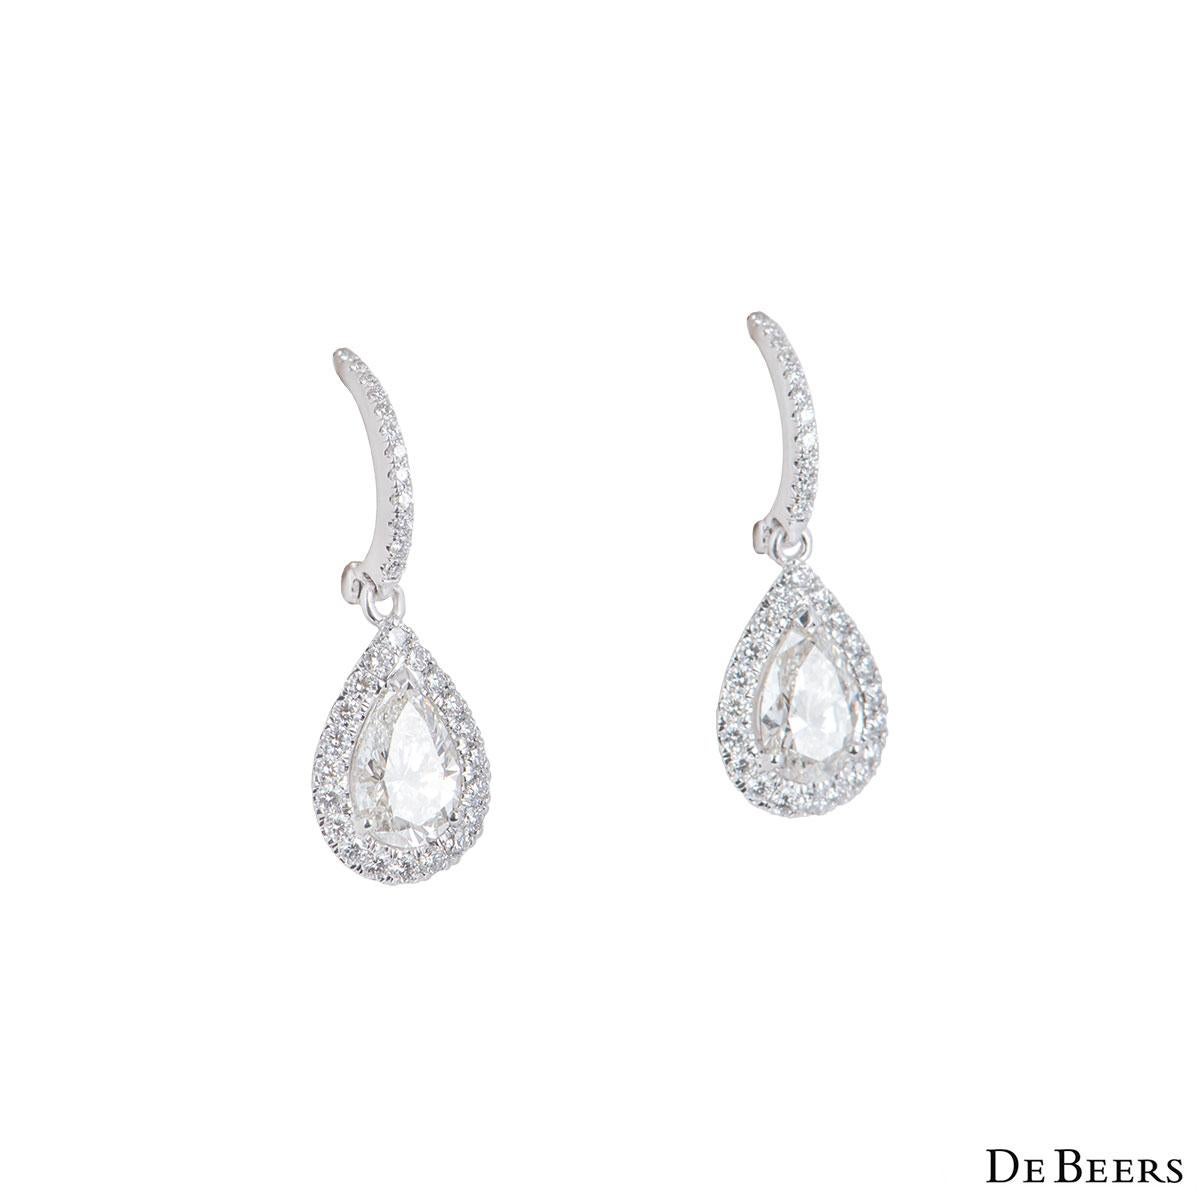 A beautiful pair of 18k white gold DeBeers diamond earrings from the Aura collection. The earrings feature a pear cut diamond in a prong setting and pave set diamonds around it and on the stem. The pear cut diamonds have a total weight of 1.42ct, H